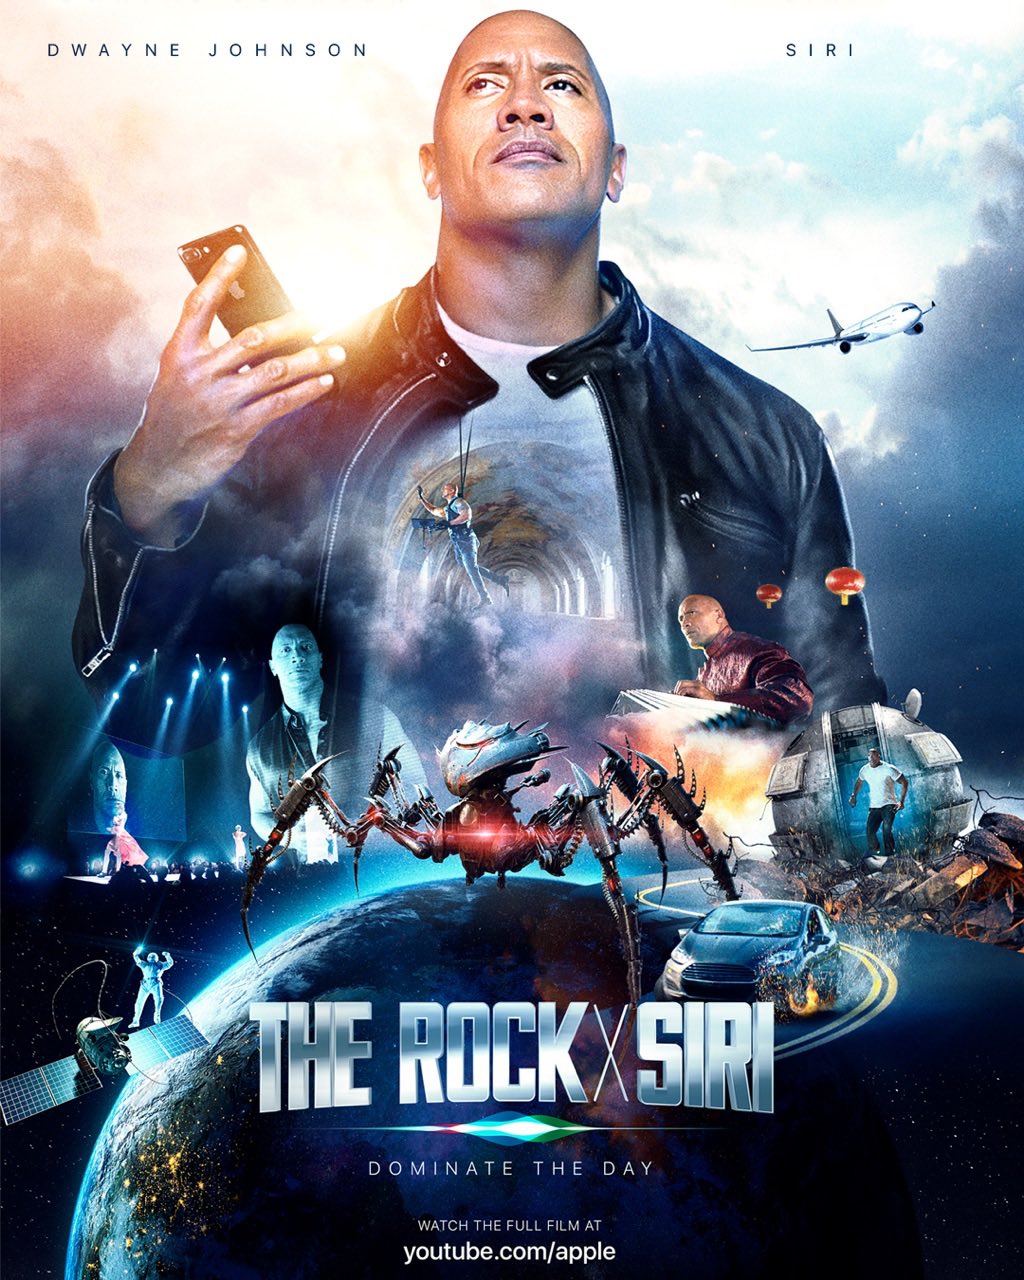 Dwayne &#039;The Rock&#039; Johnson Teams Up With Siri for New Apple &#039;Movie&#039;